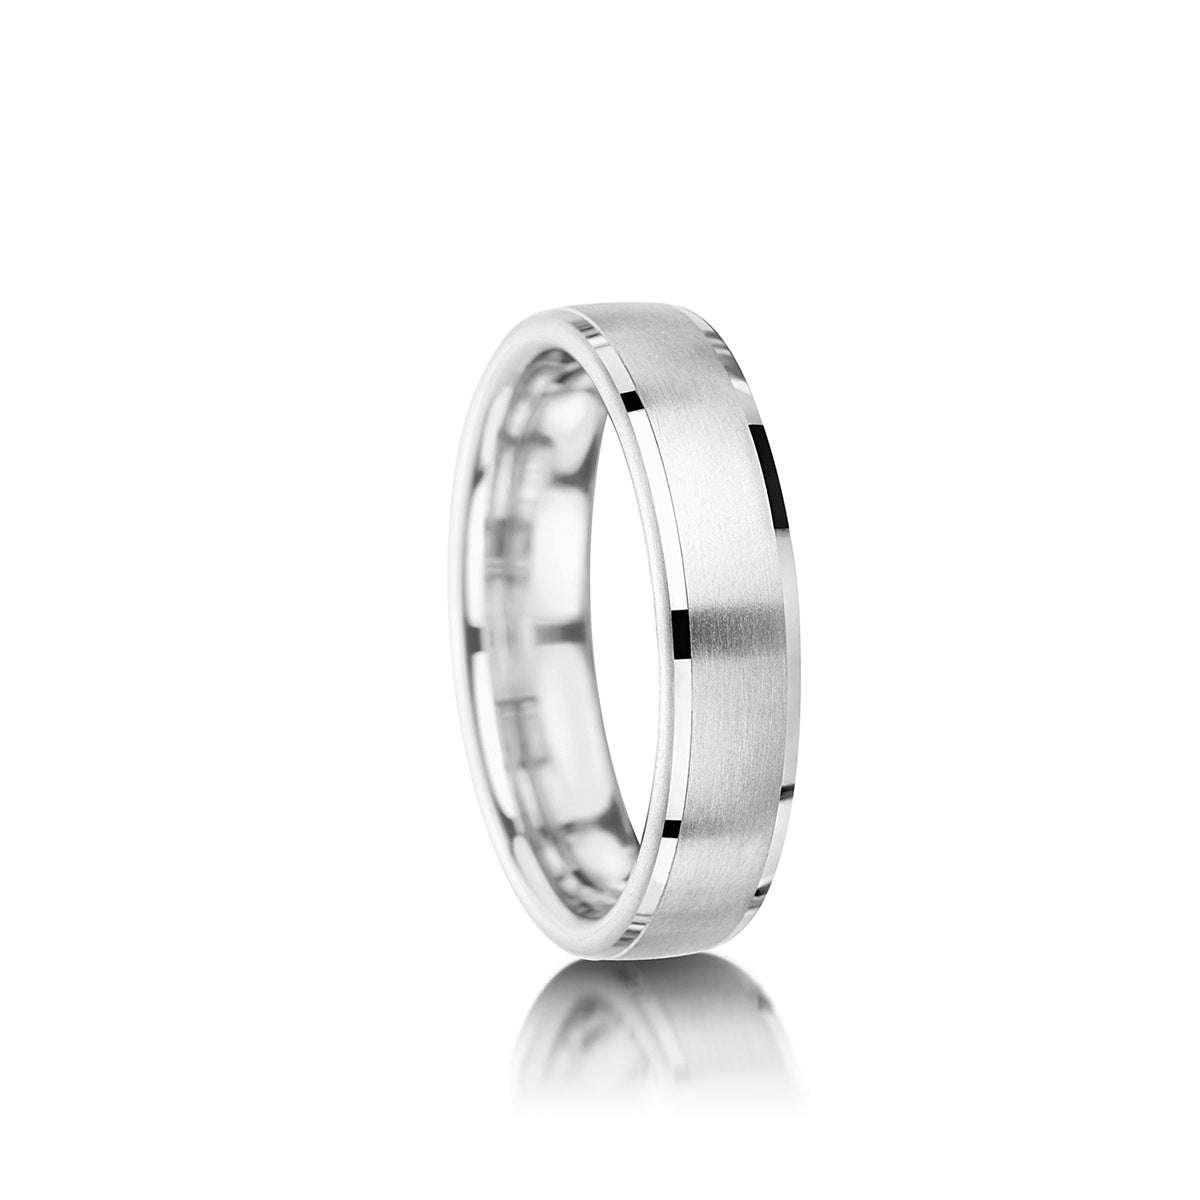 5mm Court Gents Wedding Ring – MWR2